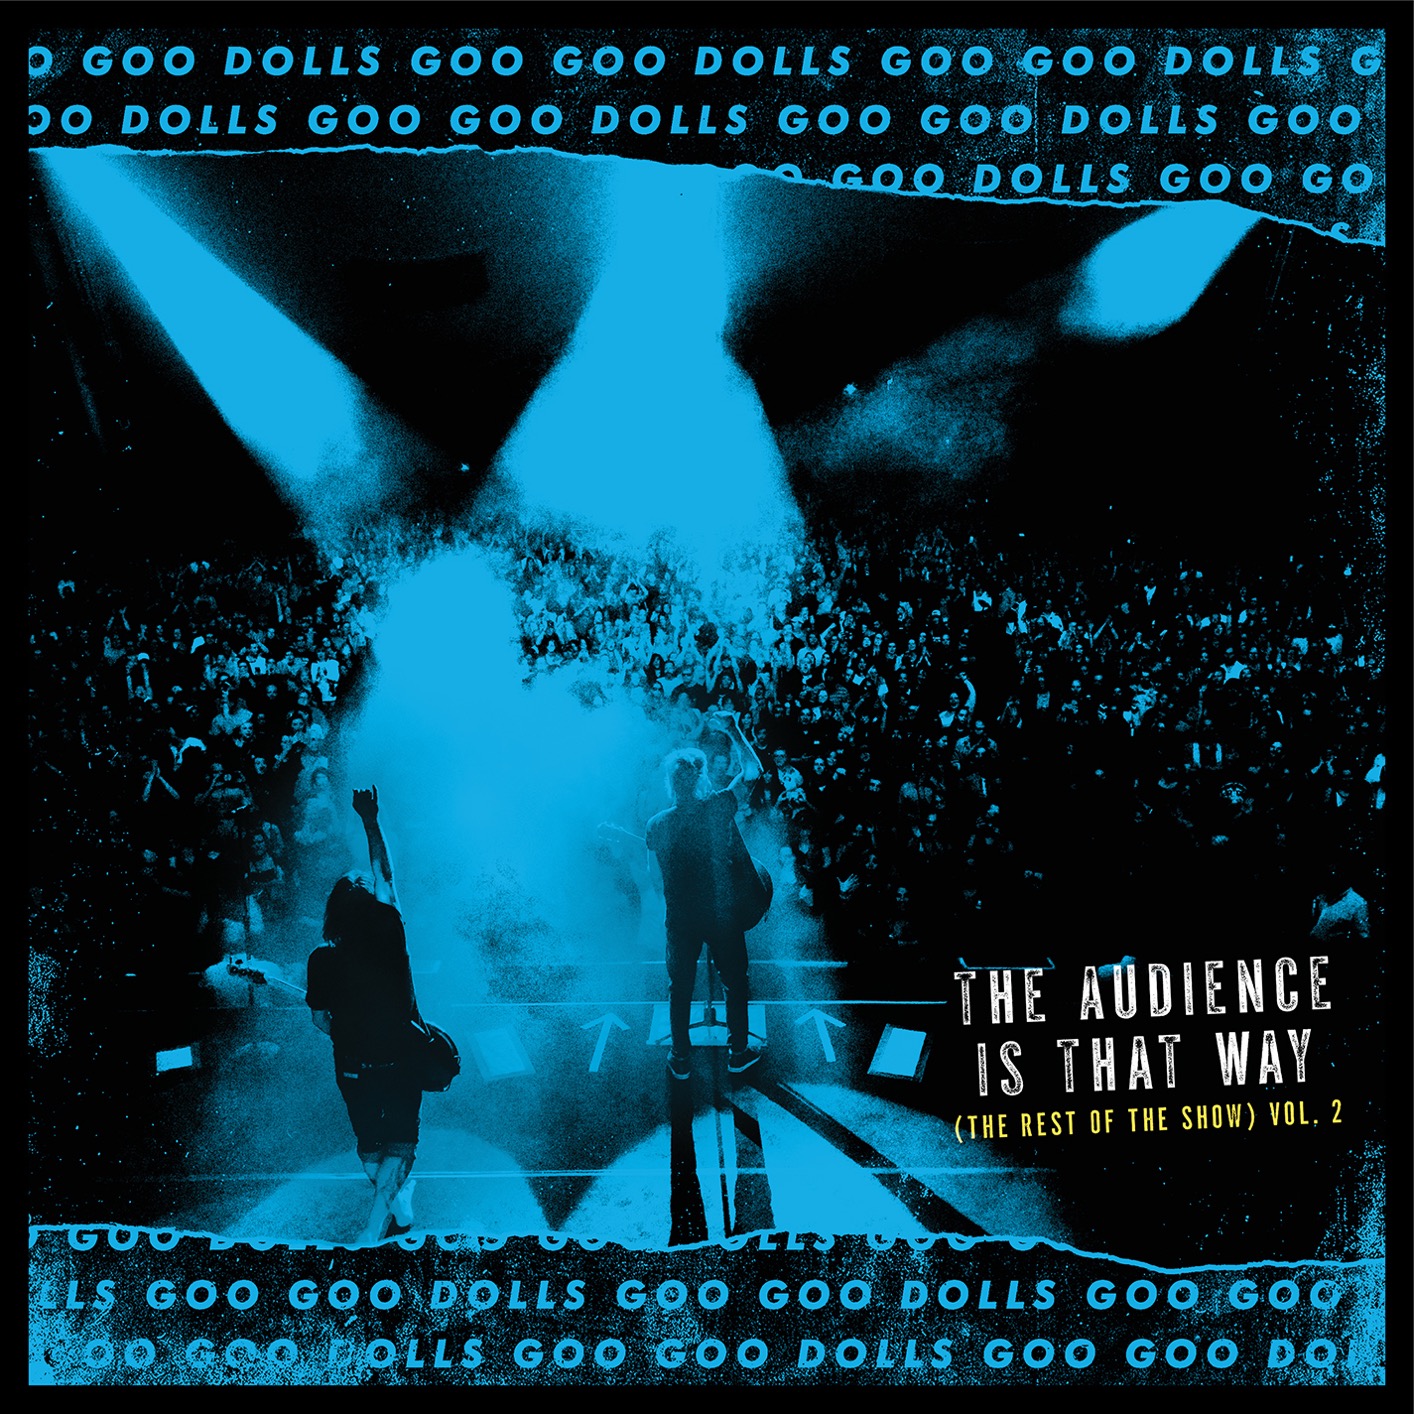 The Goo Goo Dolls - The Audience Is That Way (The Rest of the Show) Vol. 2 (2019) [FLAC 24bit/48kHz]